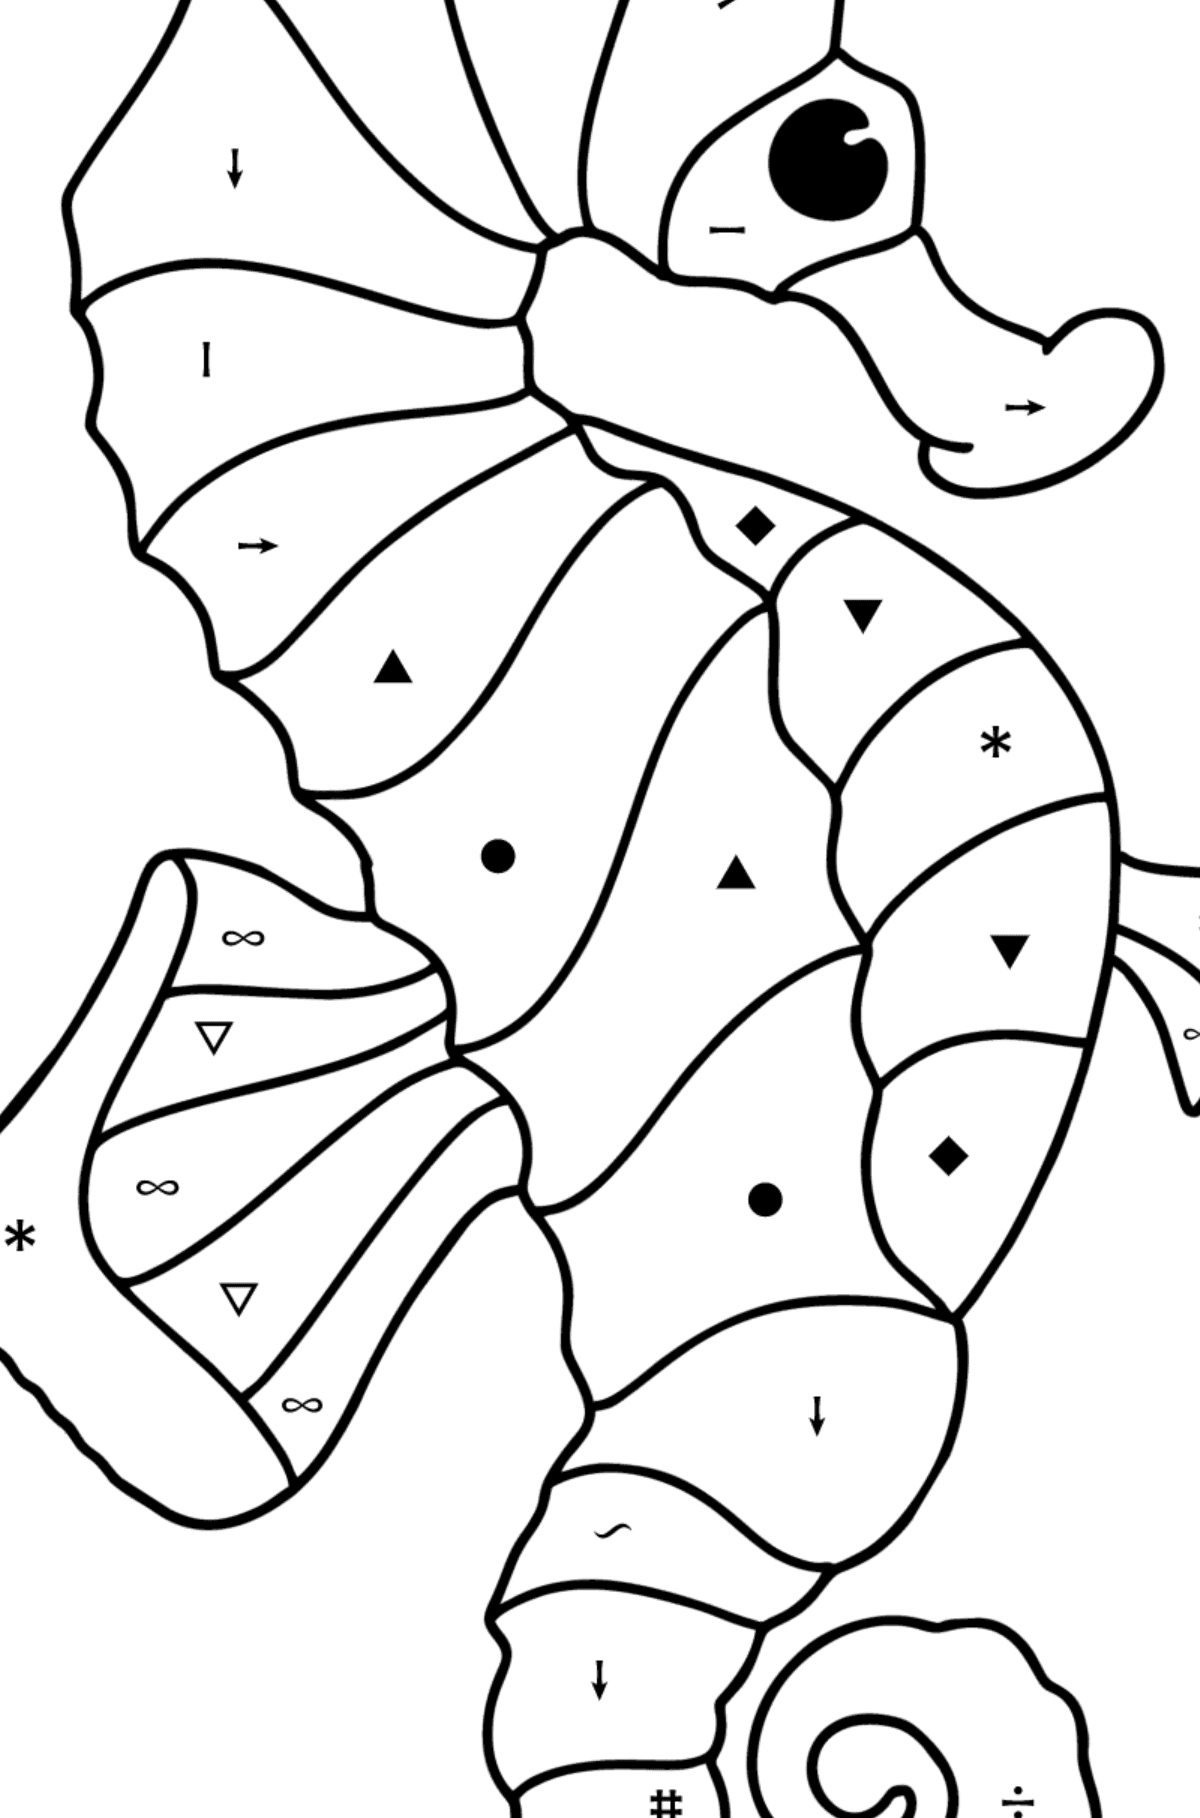 Sea Horse coloring page - Coloring by Symbols for Kids